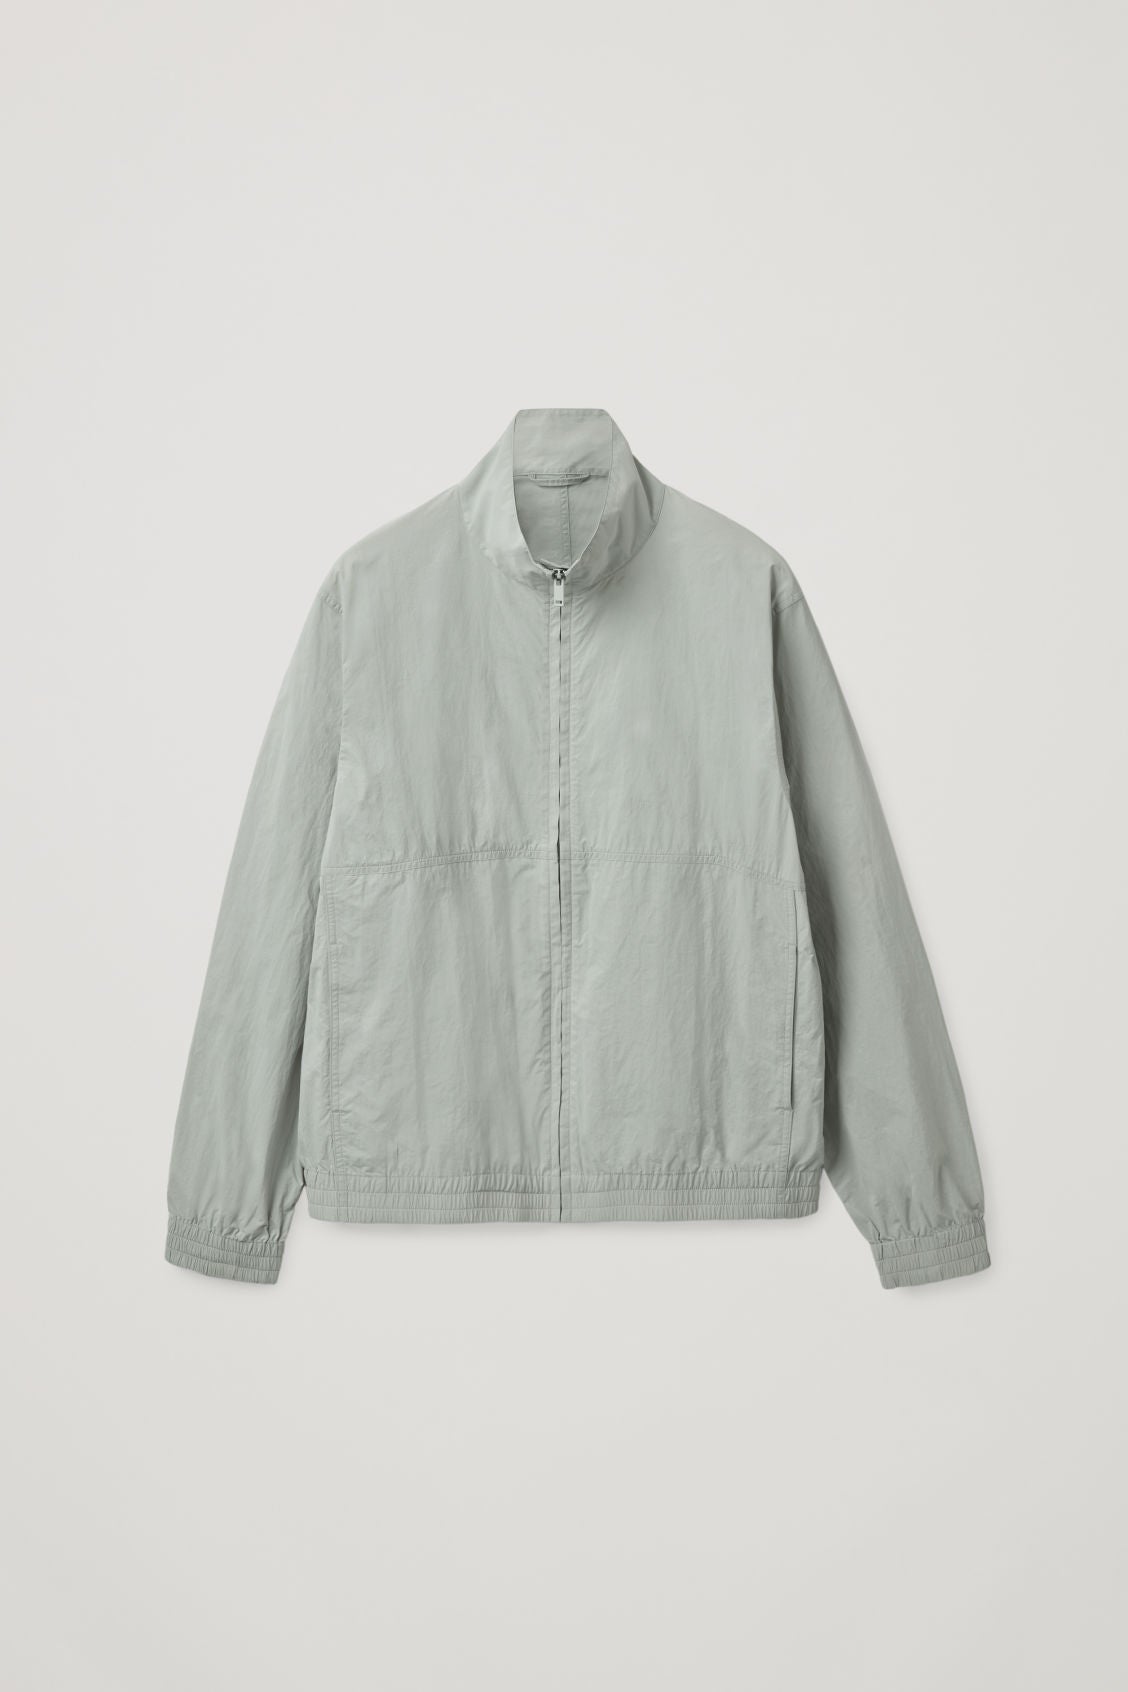 10 Lightweight Jackets Ideal For That Time Between Summer And Fall ...